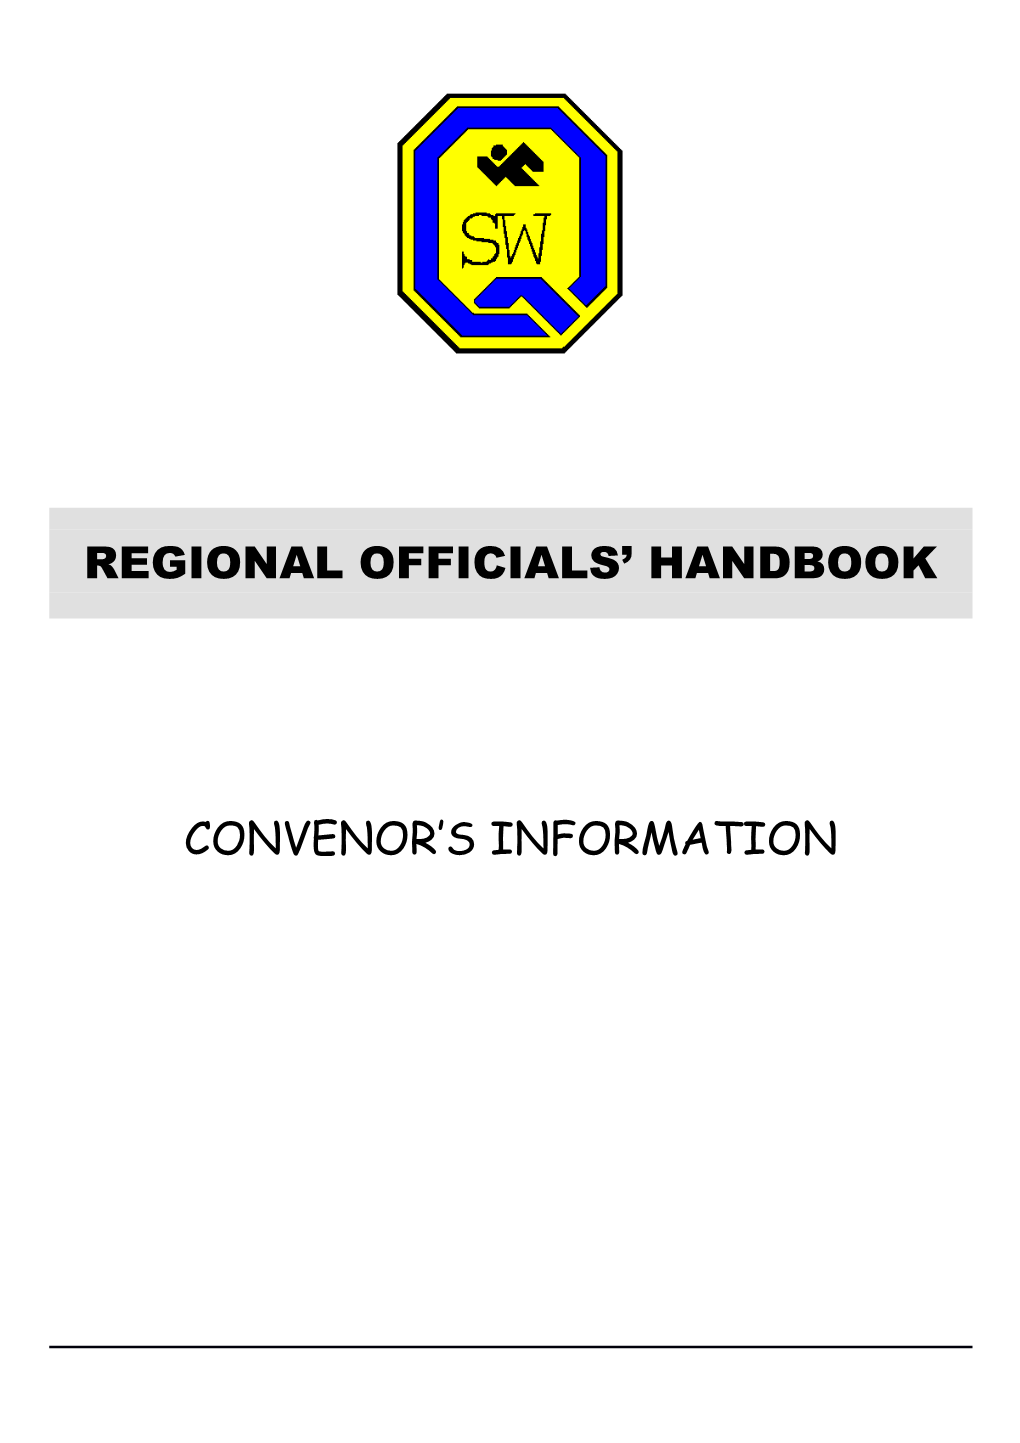 Message from the Regional Sports Officer to Convenors Regarding This Handbook